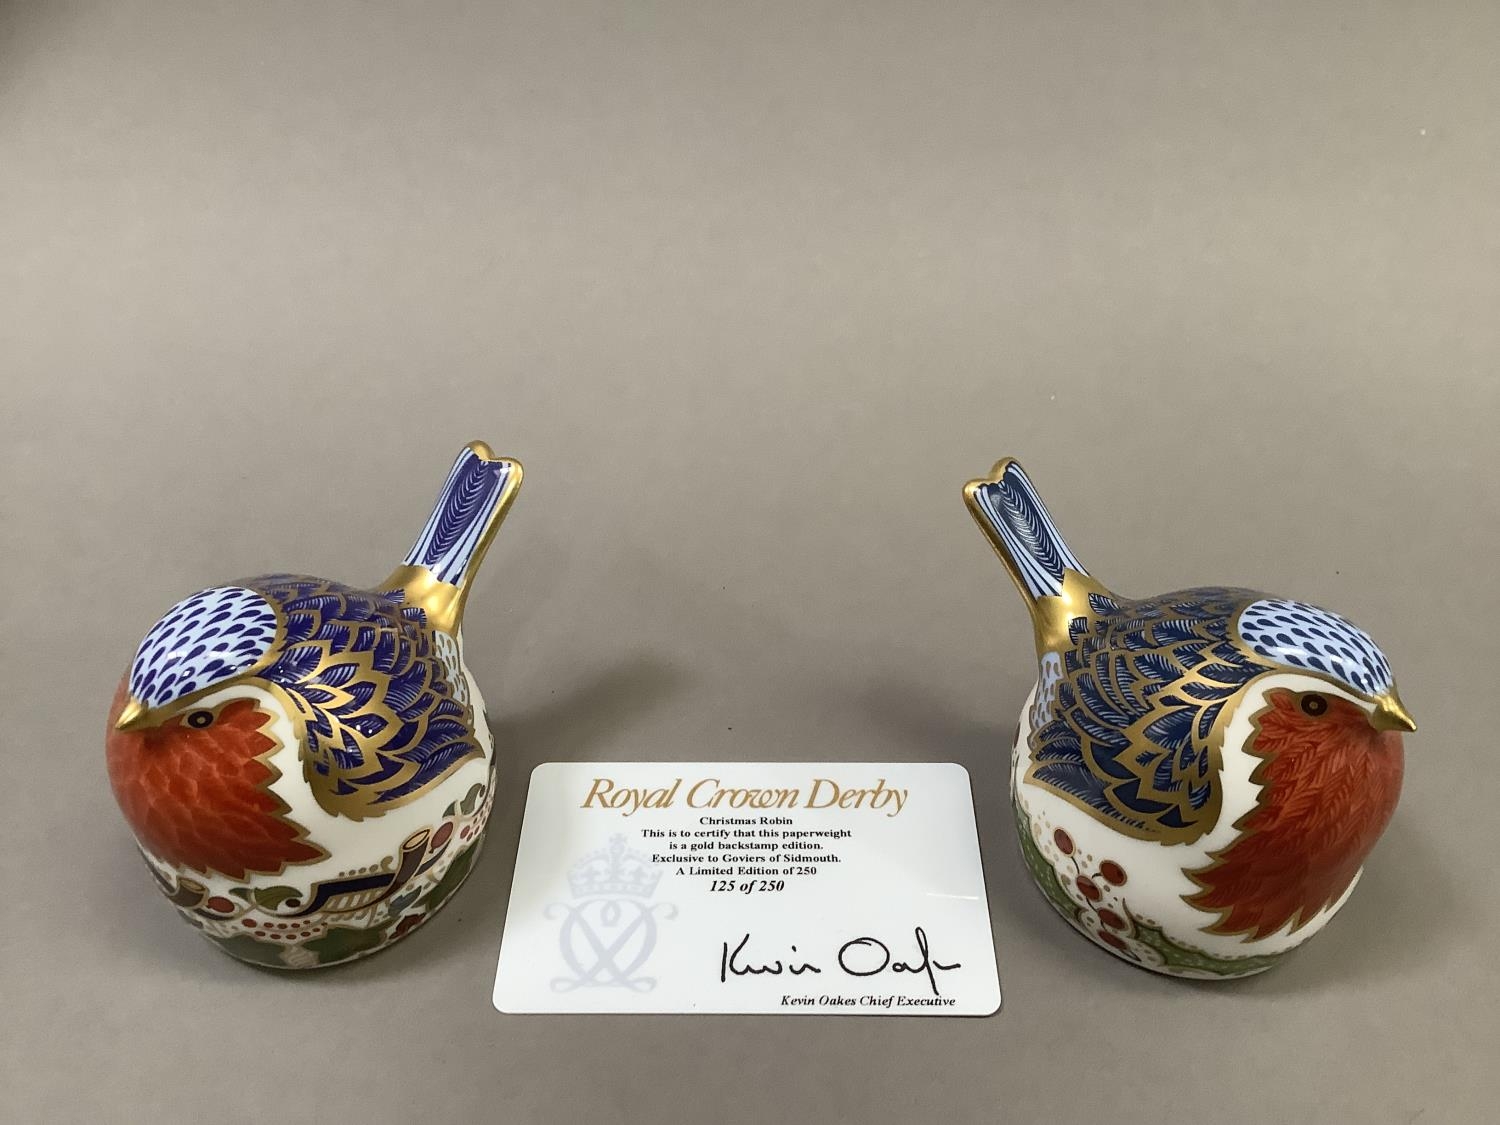 Two Royal Crown Derby Christmas robins, one a pre-release edition of 250 exclusive to Goviers of - Image 2 of 5